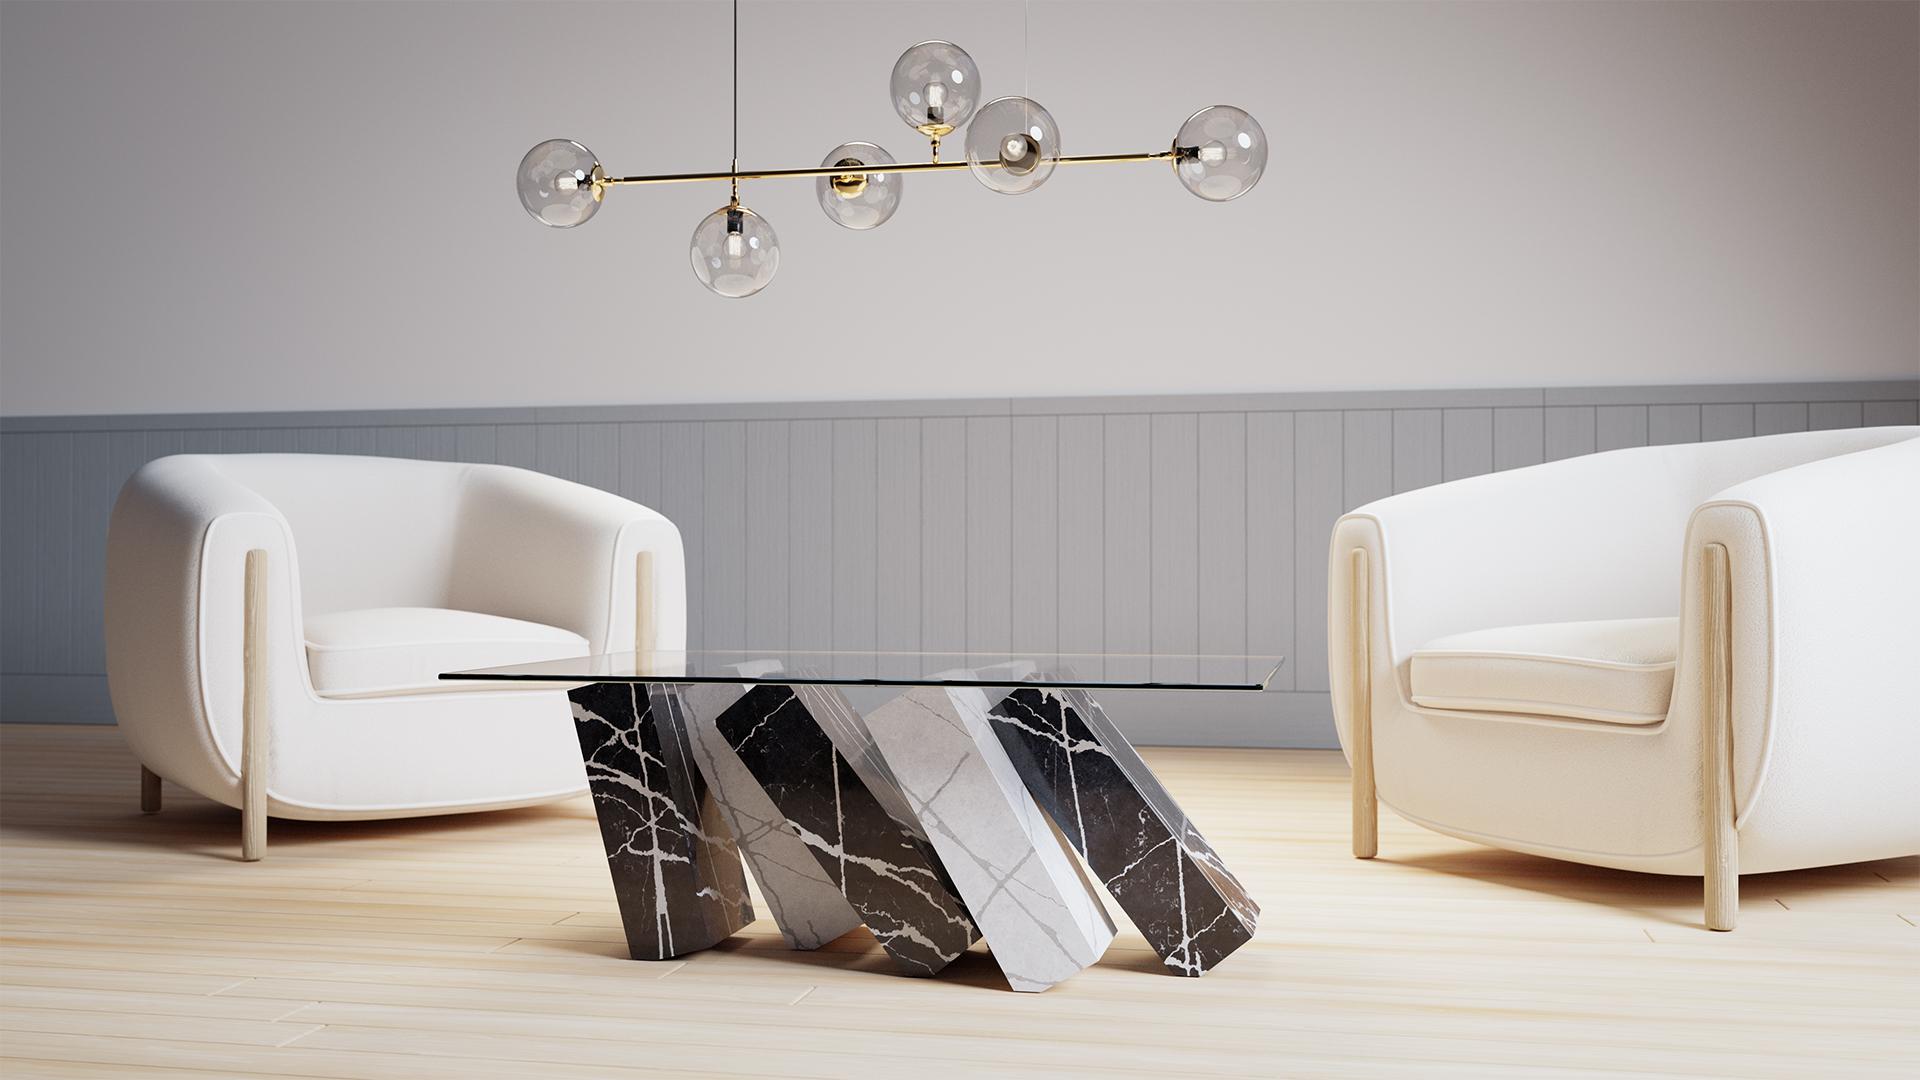 The Megalith coffee table is a striking new addition to the Megalith collection; a dazzling piece of modern furniture from Christopher Duffy, and luxurious addition to the living space.

A glass tabletop balances across a series of six toppling